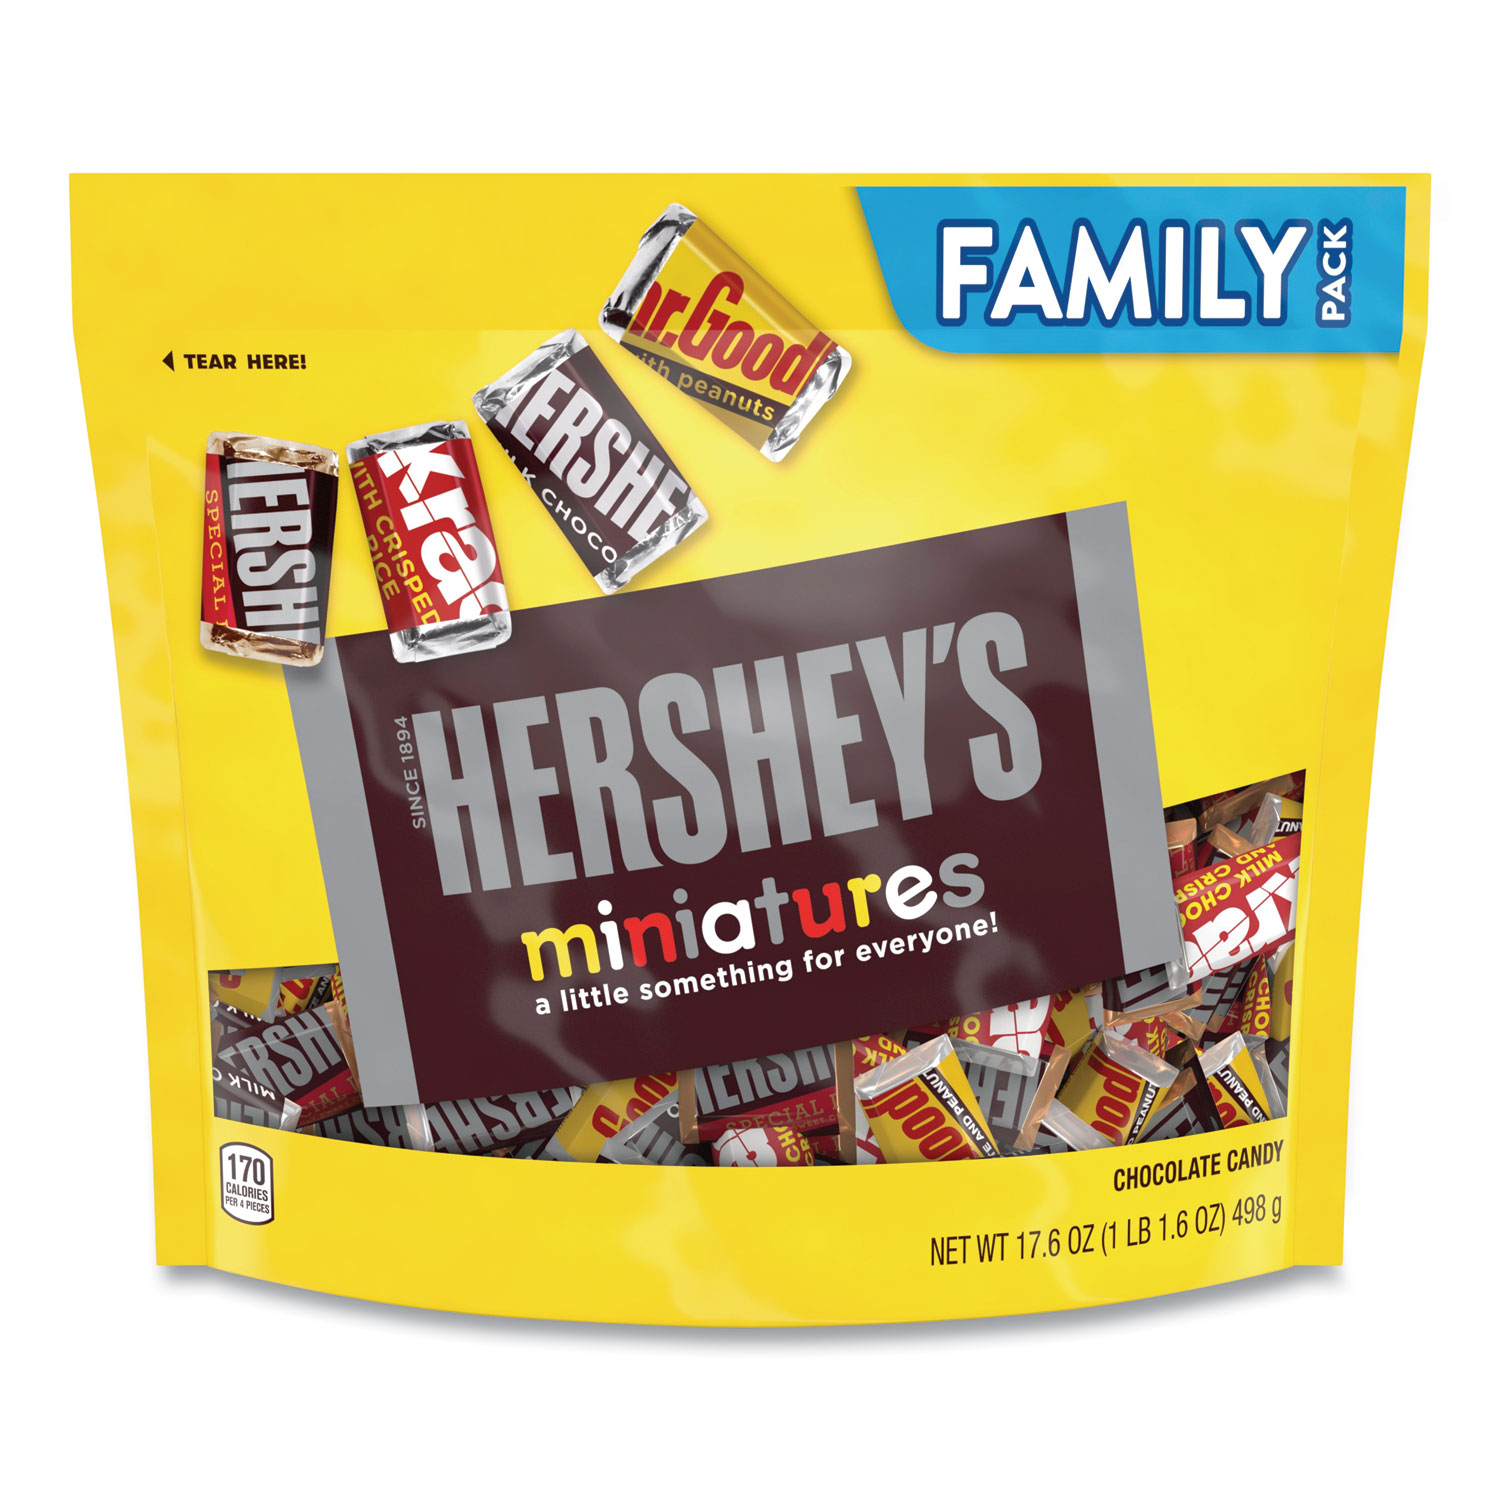  Hershey's 21491 Miniatures Variety Family Pack, Assorted Chocolates, 17.6 oz Bag, Free Delivery in 1-4 Business Days (GRR24600427) 